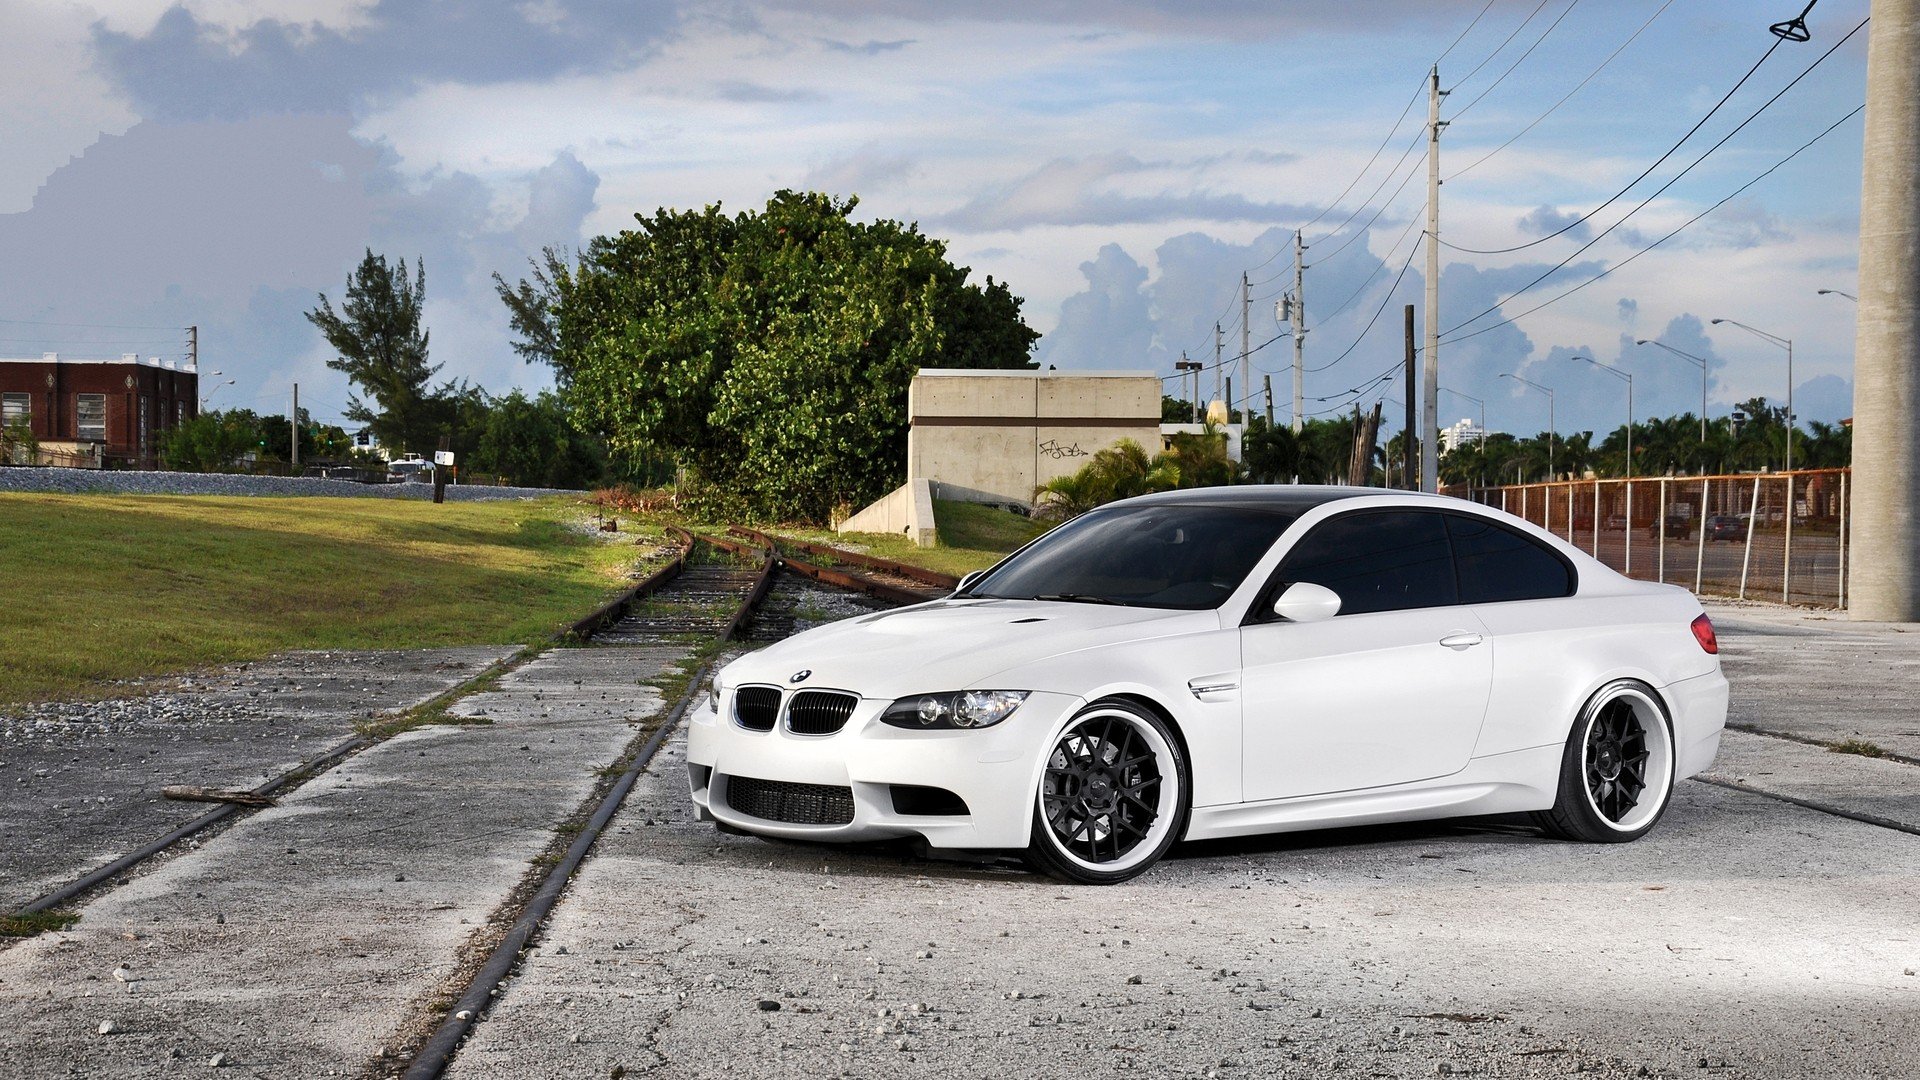 cars, Vehicles, Tuning, White, Cars, Tuned, Bmw, M3, E92 Wallpaper